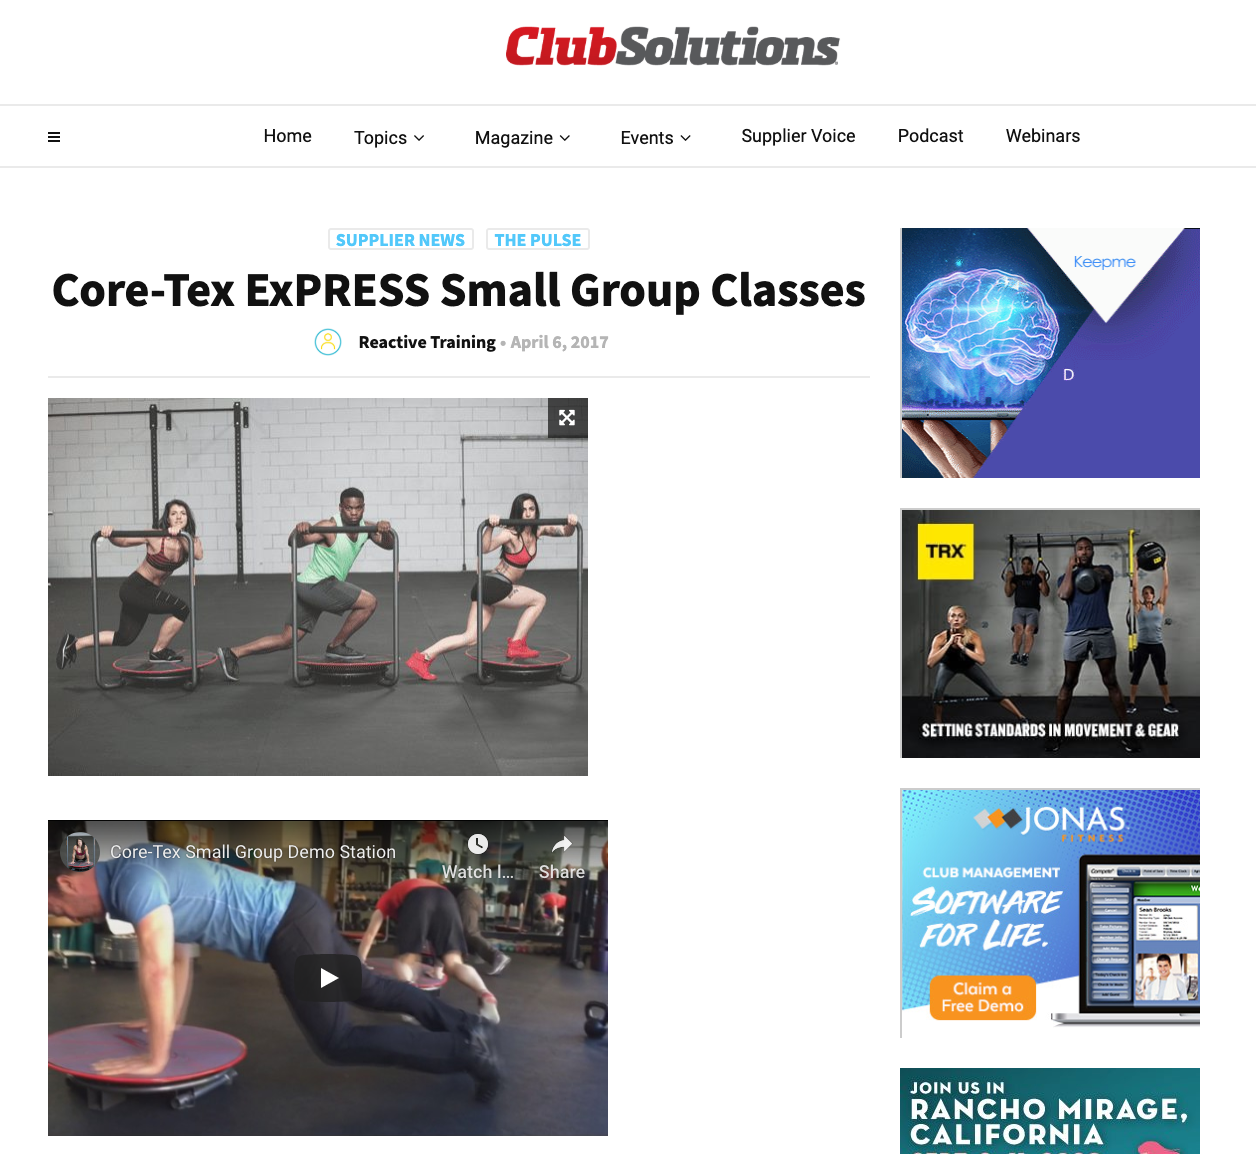 CLUB SLOUTIONS MAGAZINE, APRIL 2017: Core-Tex ExPRESS Small Group Classes